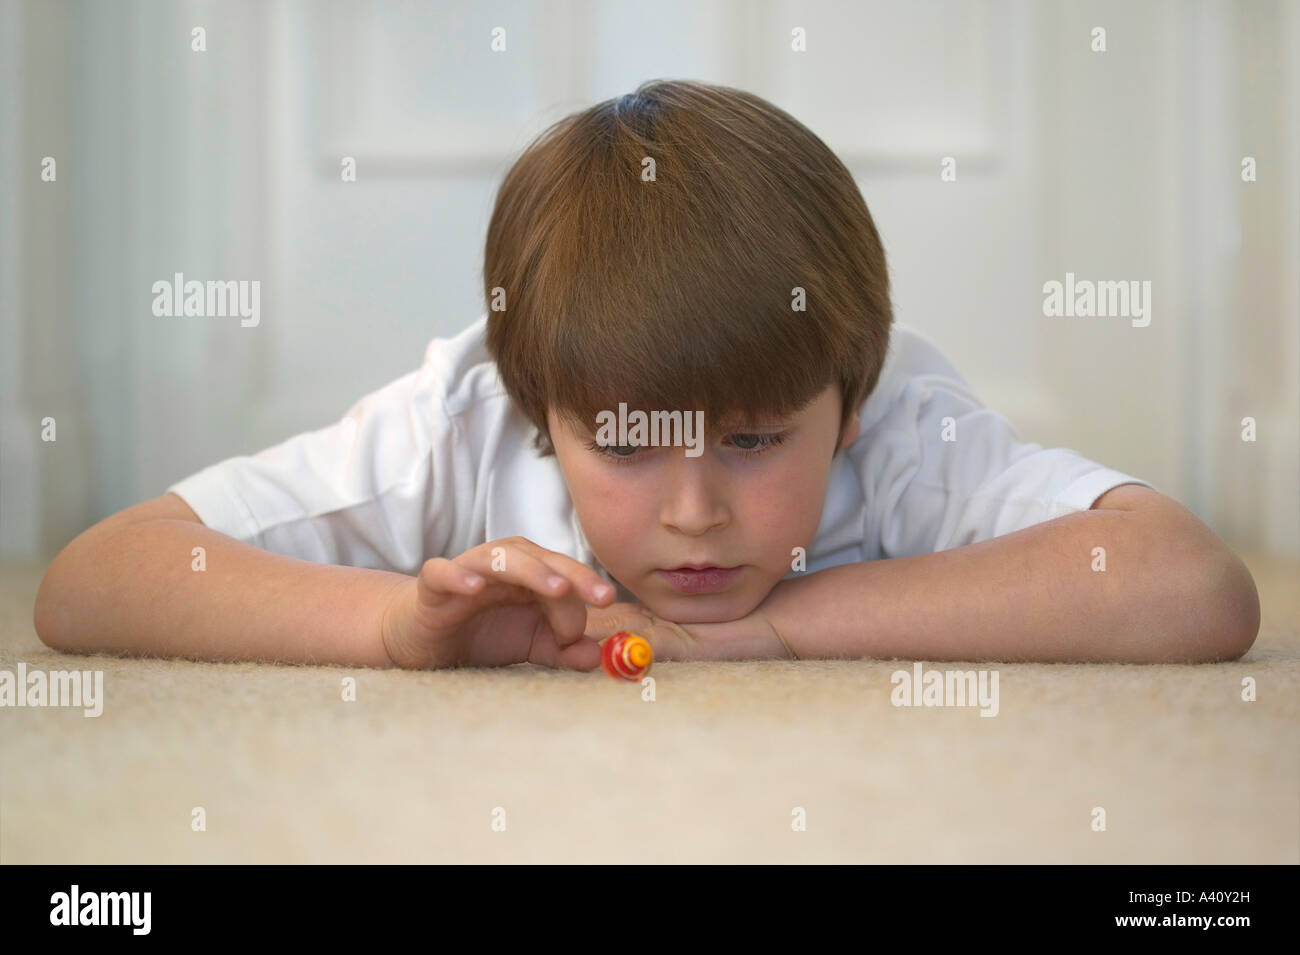 Young boy lying down about to flick a marble a look of concentration on his face Stock Photo